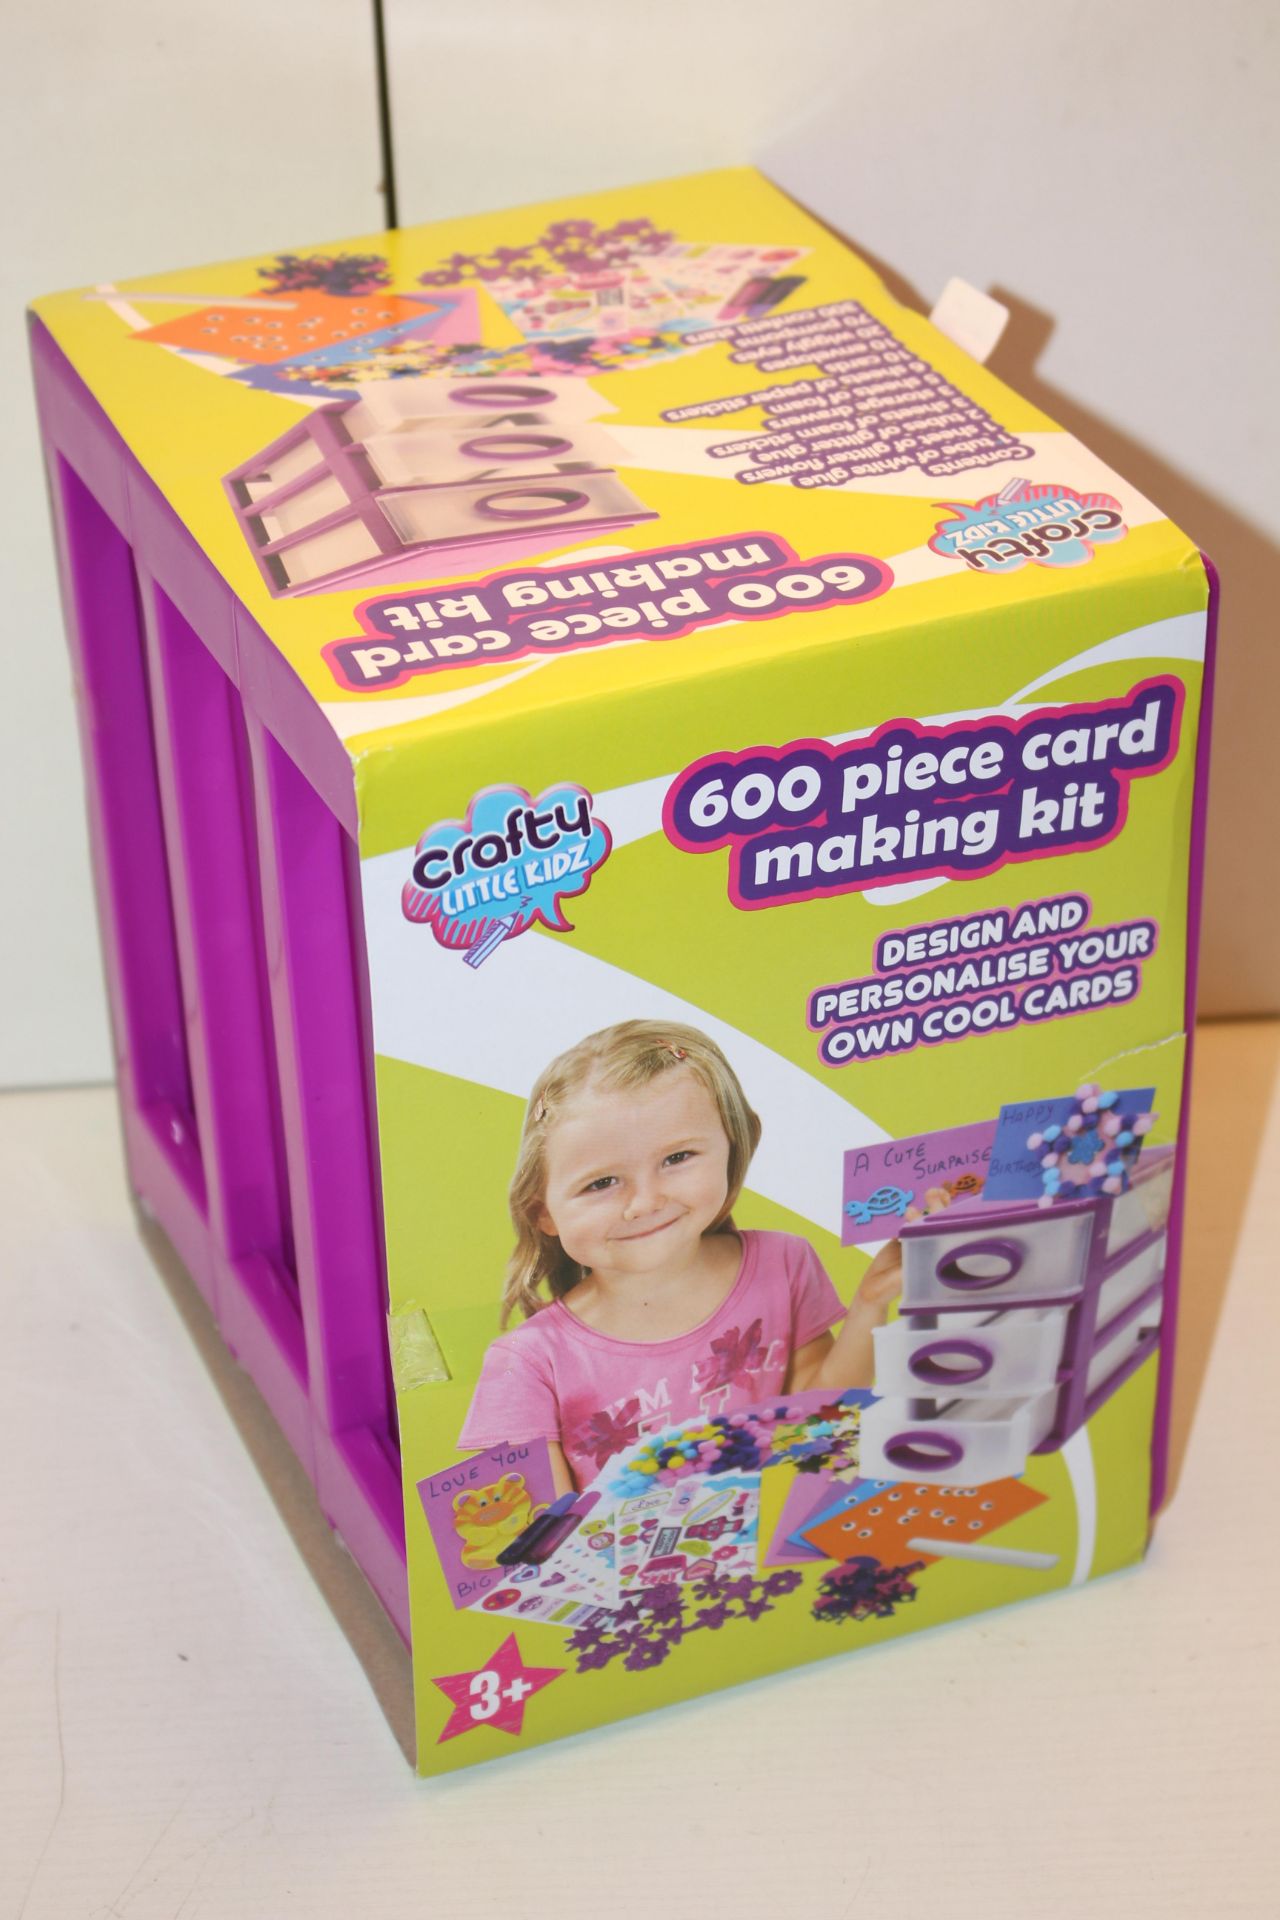 BOXED CRAFTY LITTLE KIDZ 600PIECE CARD MAKING KIT Condition ReportAppraisal Available on Request-